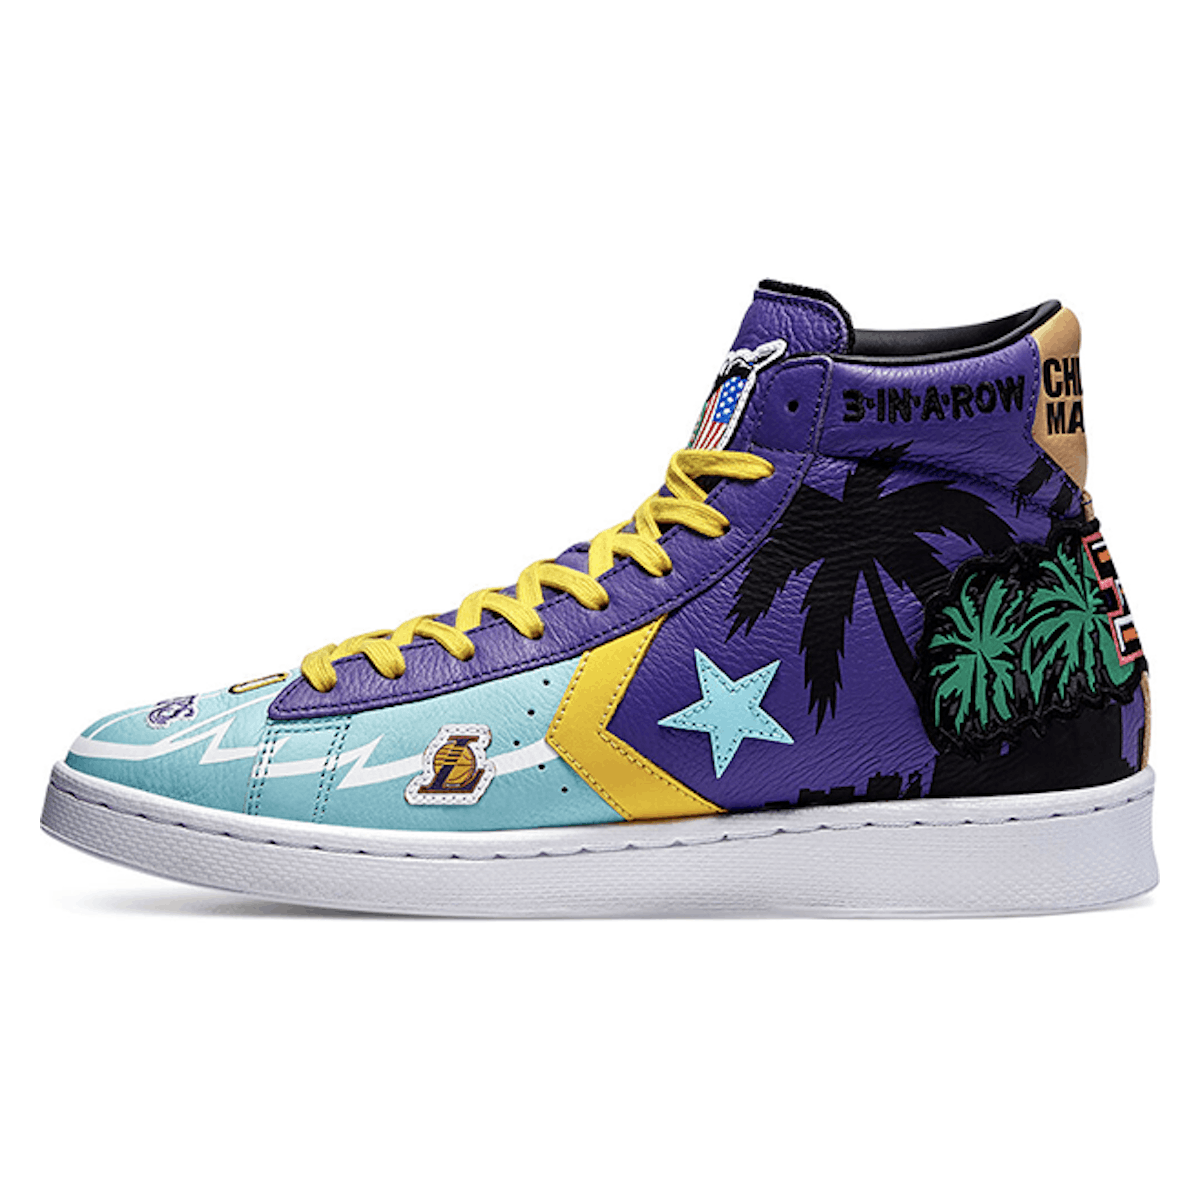 Converse x Chinatown Market "Lakers Championship Jacket" Pro Leather High Top